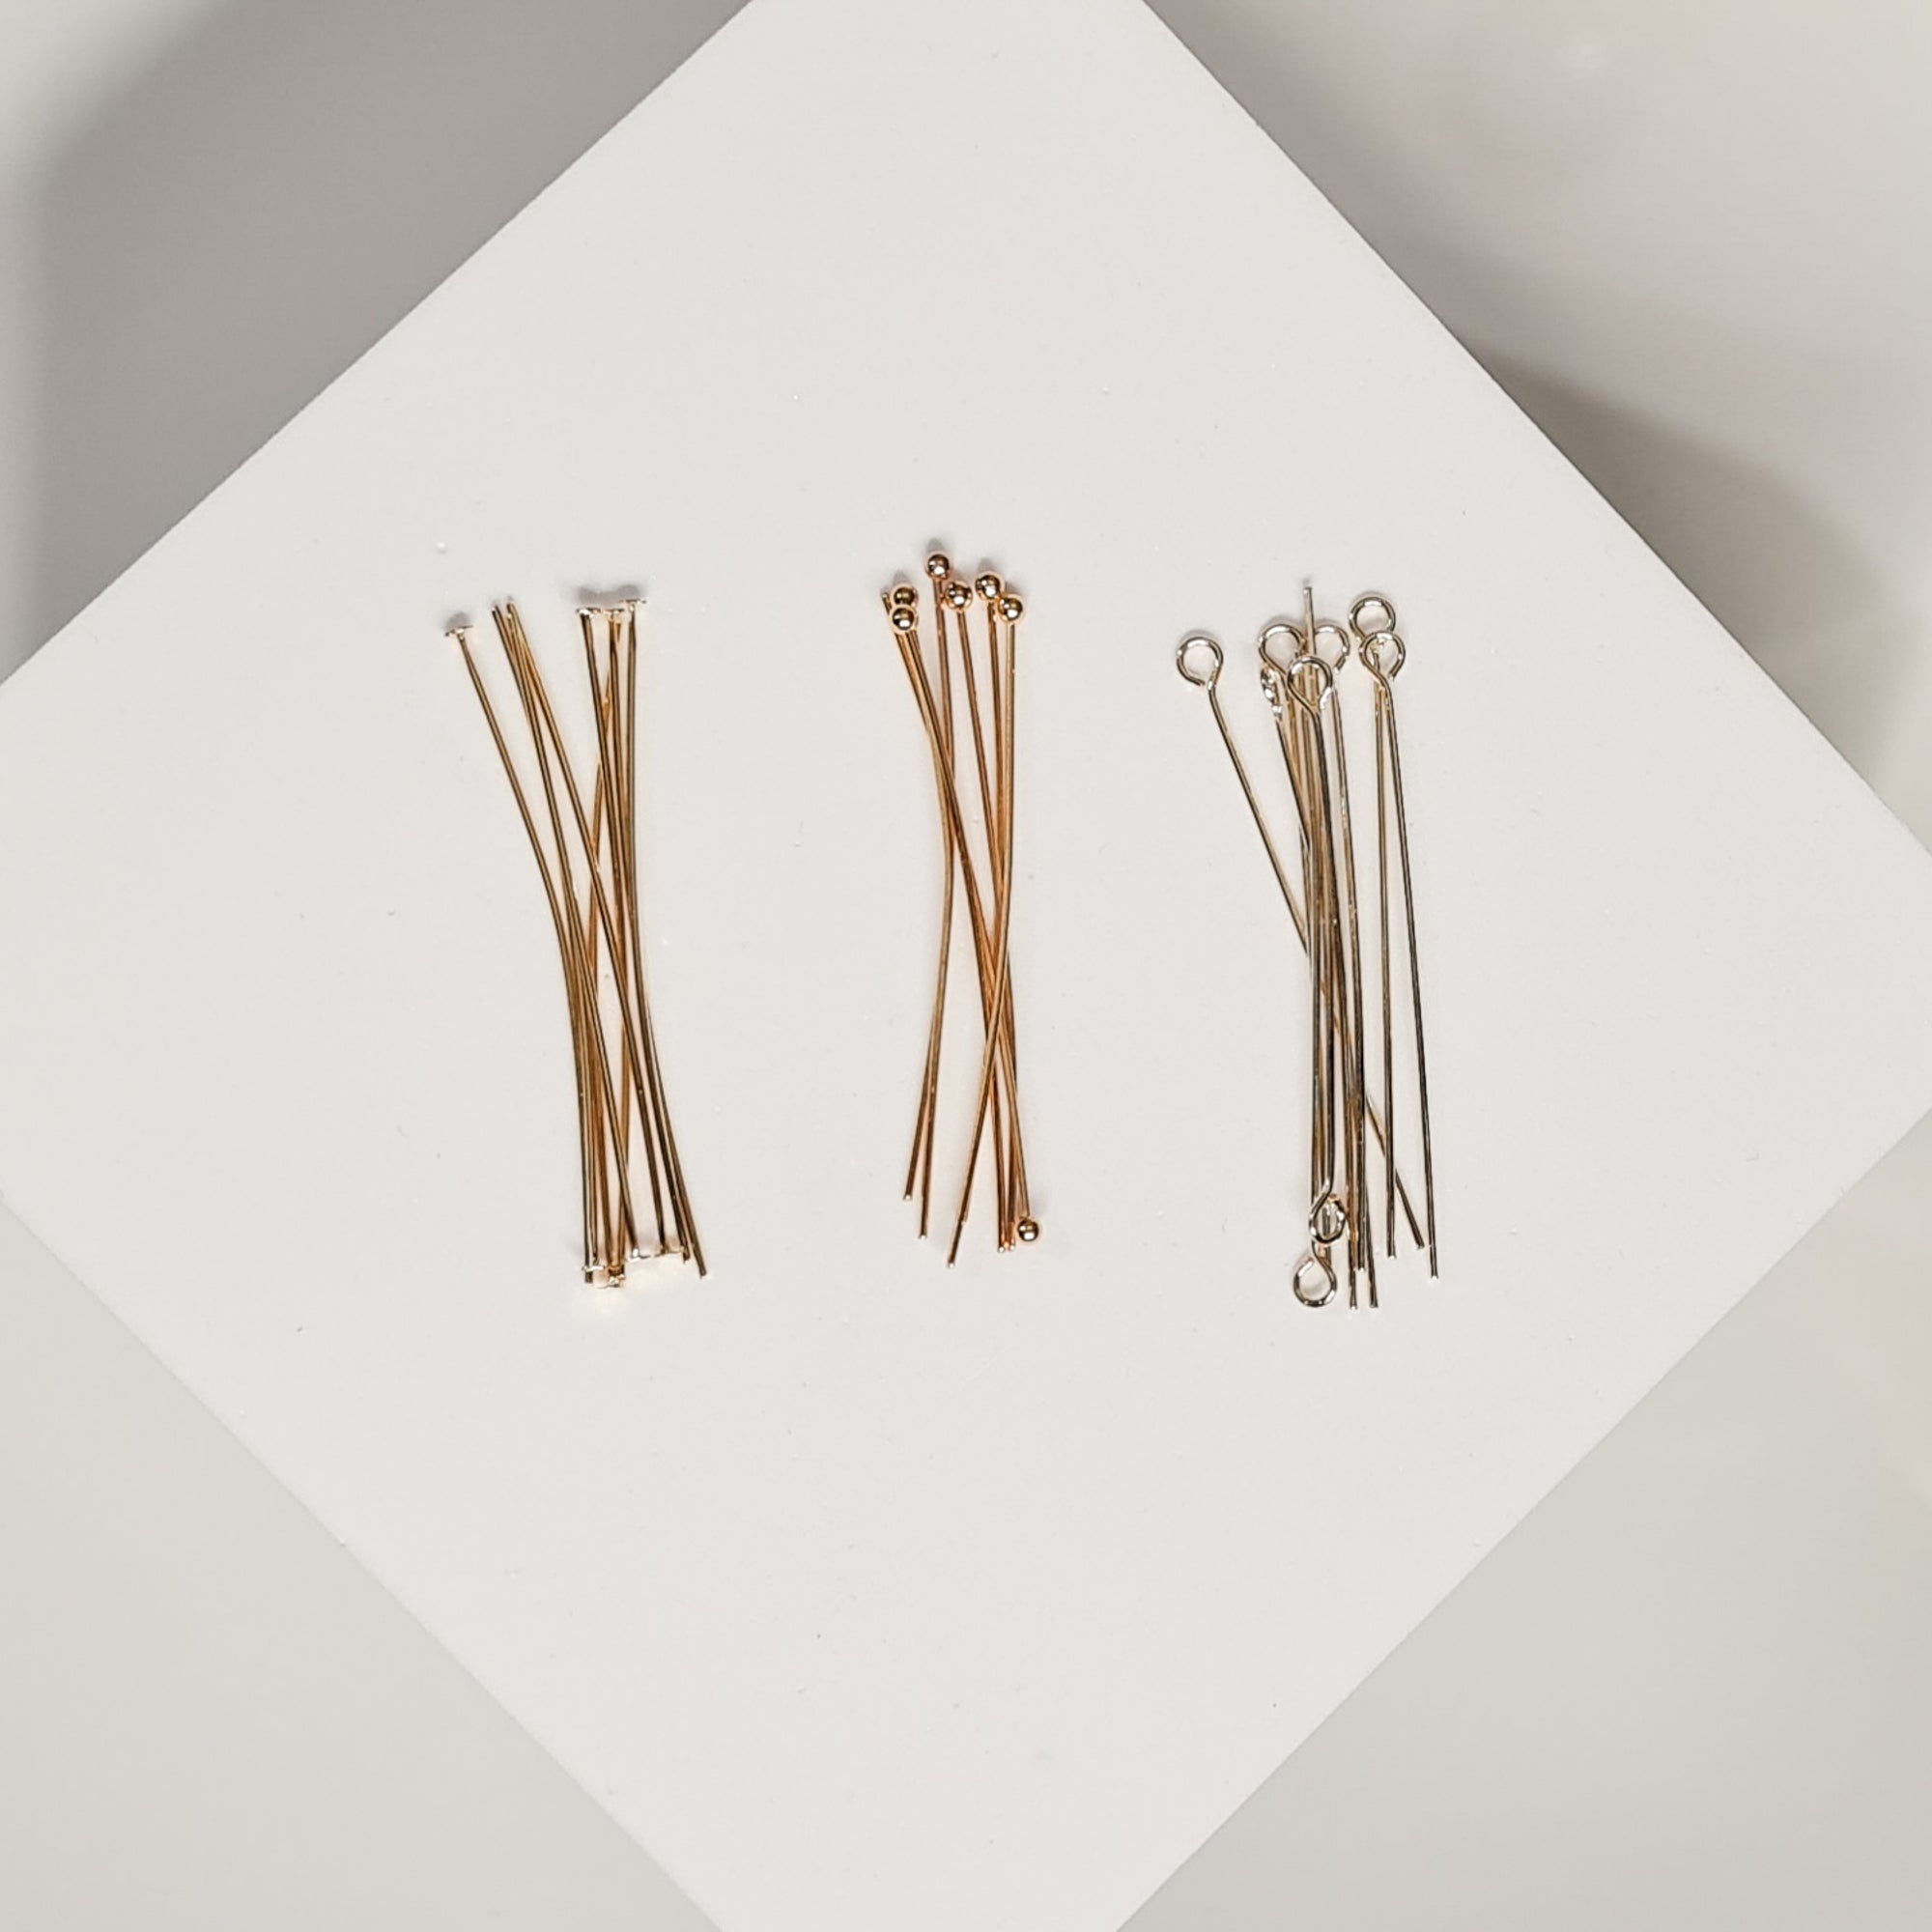 18K Gold Plated Stainless Steel Flat Head Pin - 100 pins